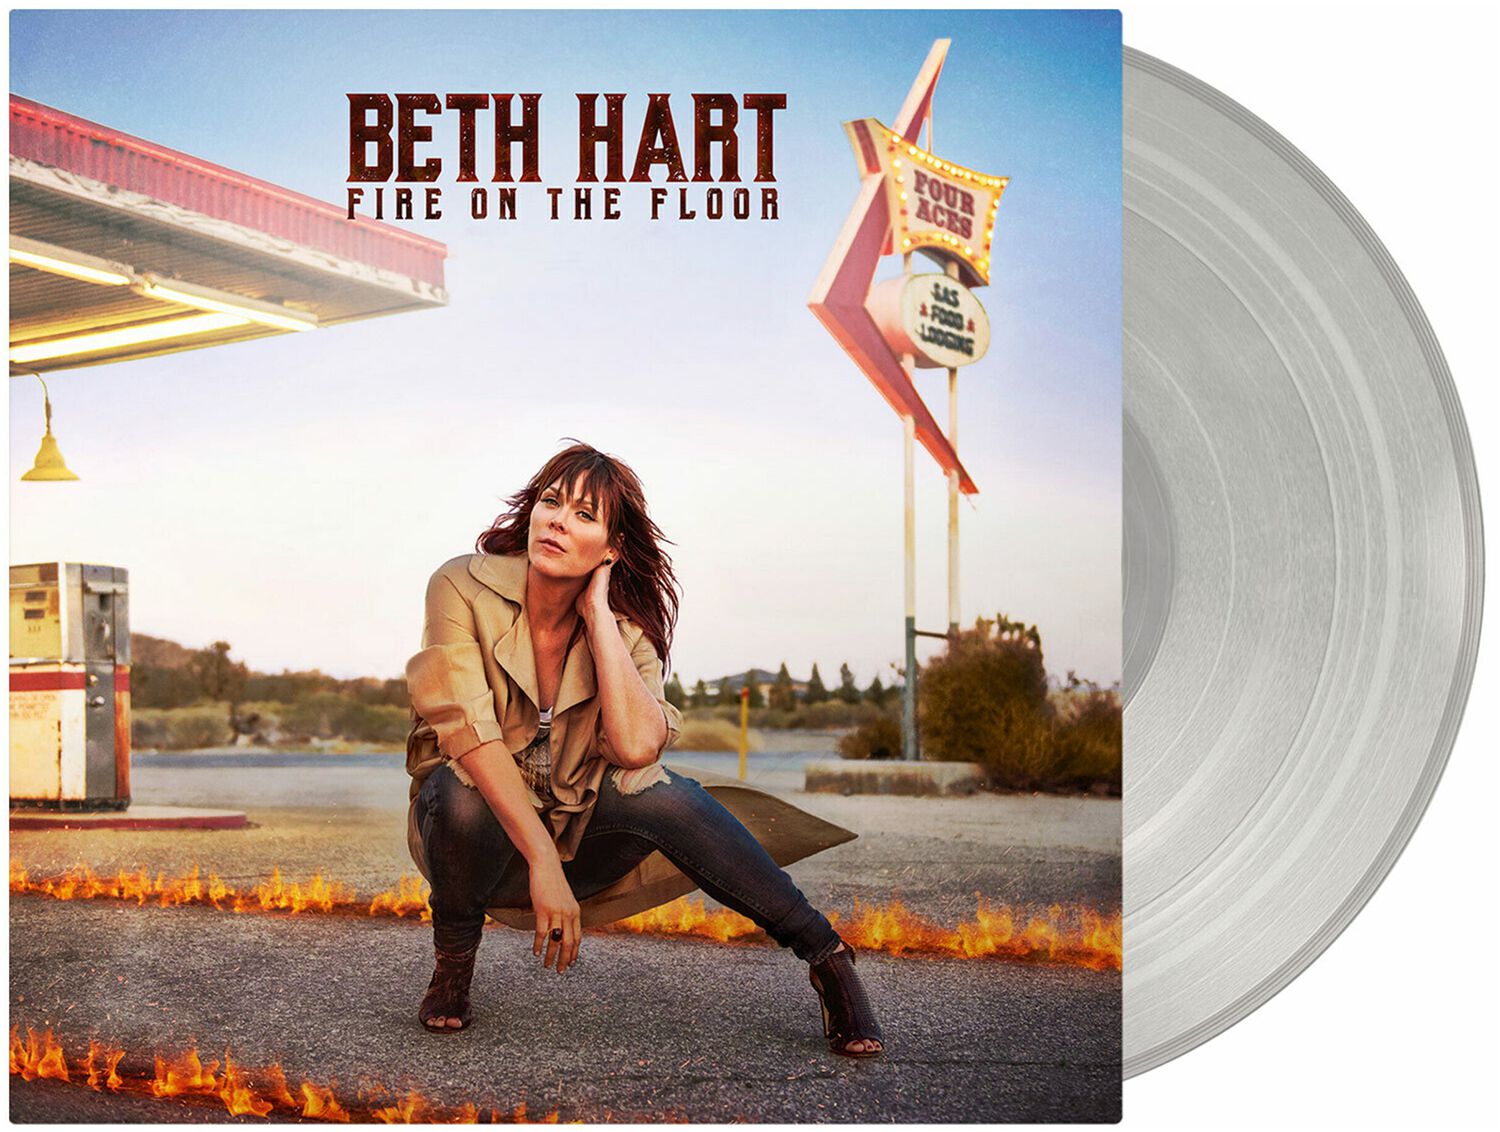 Image of Beth Hart Fire on the floor LP farbig